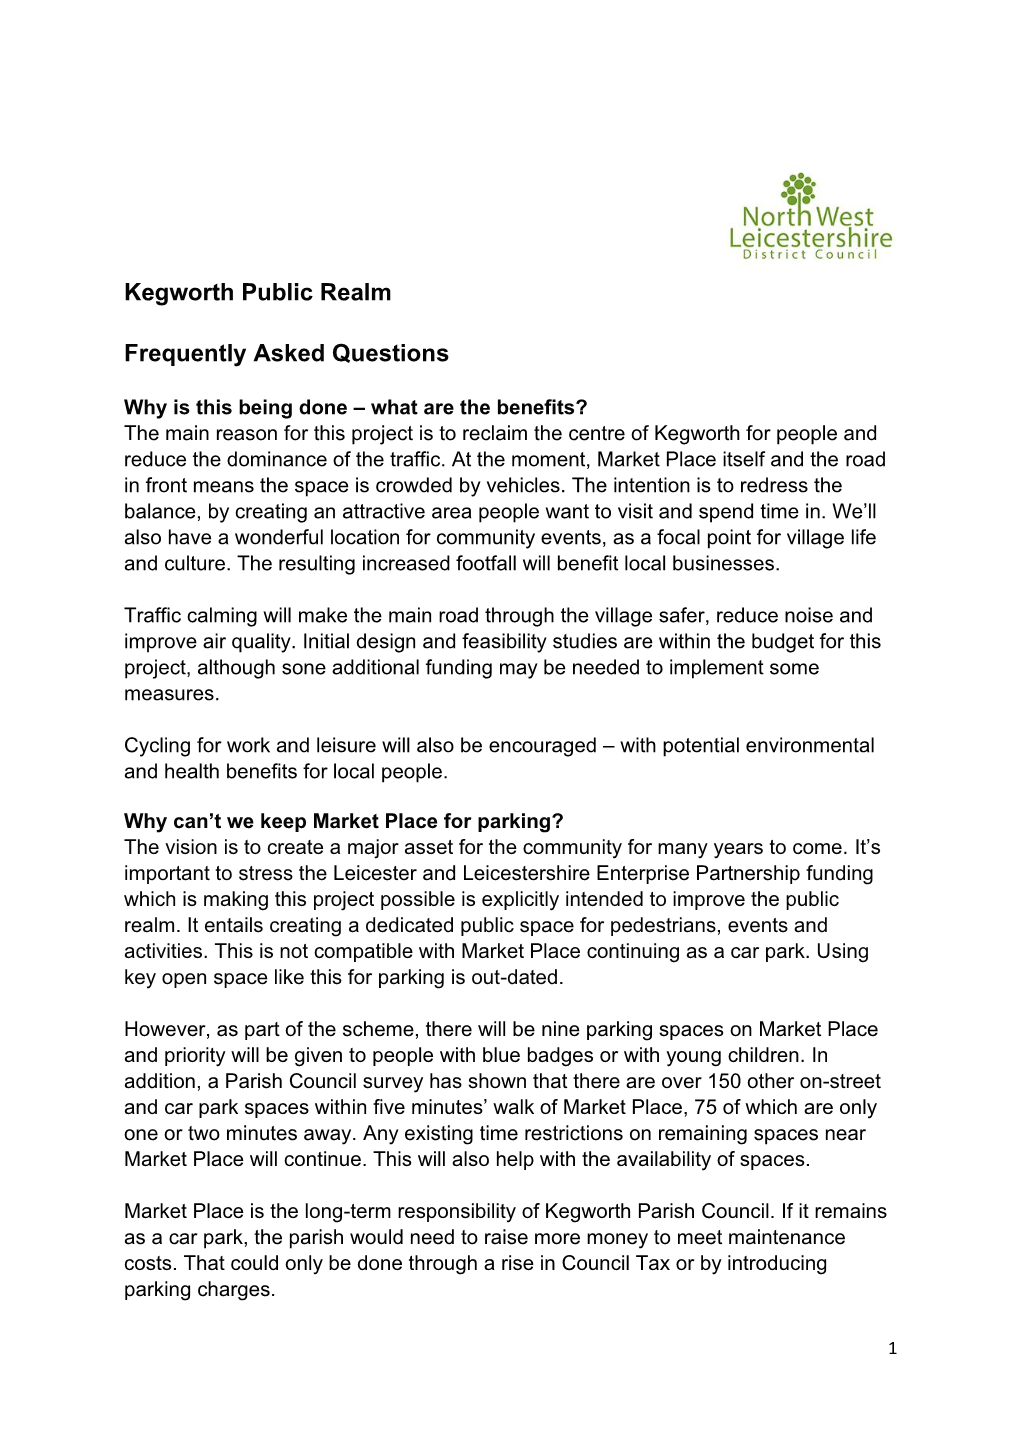 Kegworth Public Realm Frequently Asked Questions